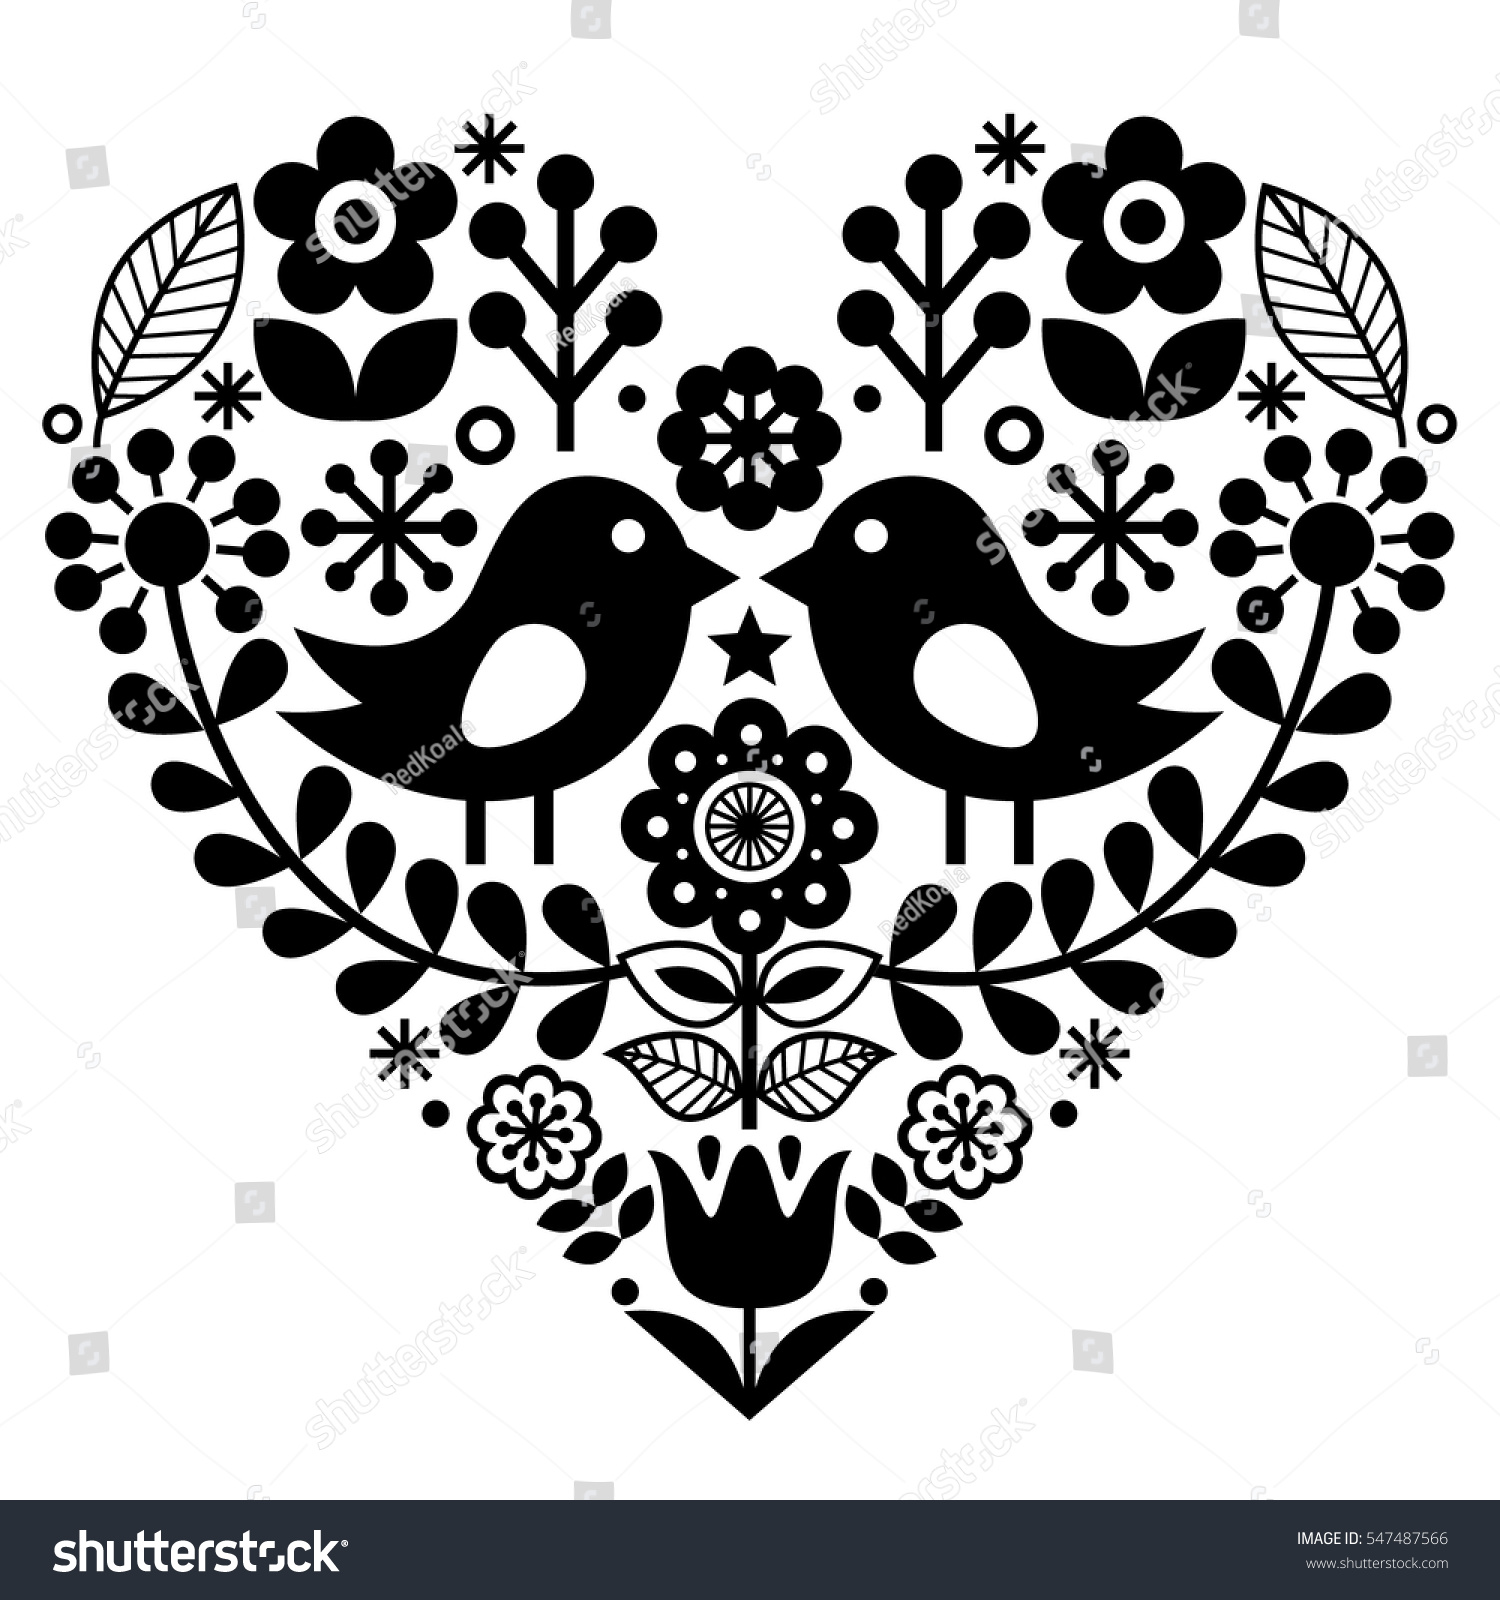 Folk art pattern with birds and flowers Finnish inspired Valentine s Day